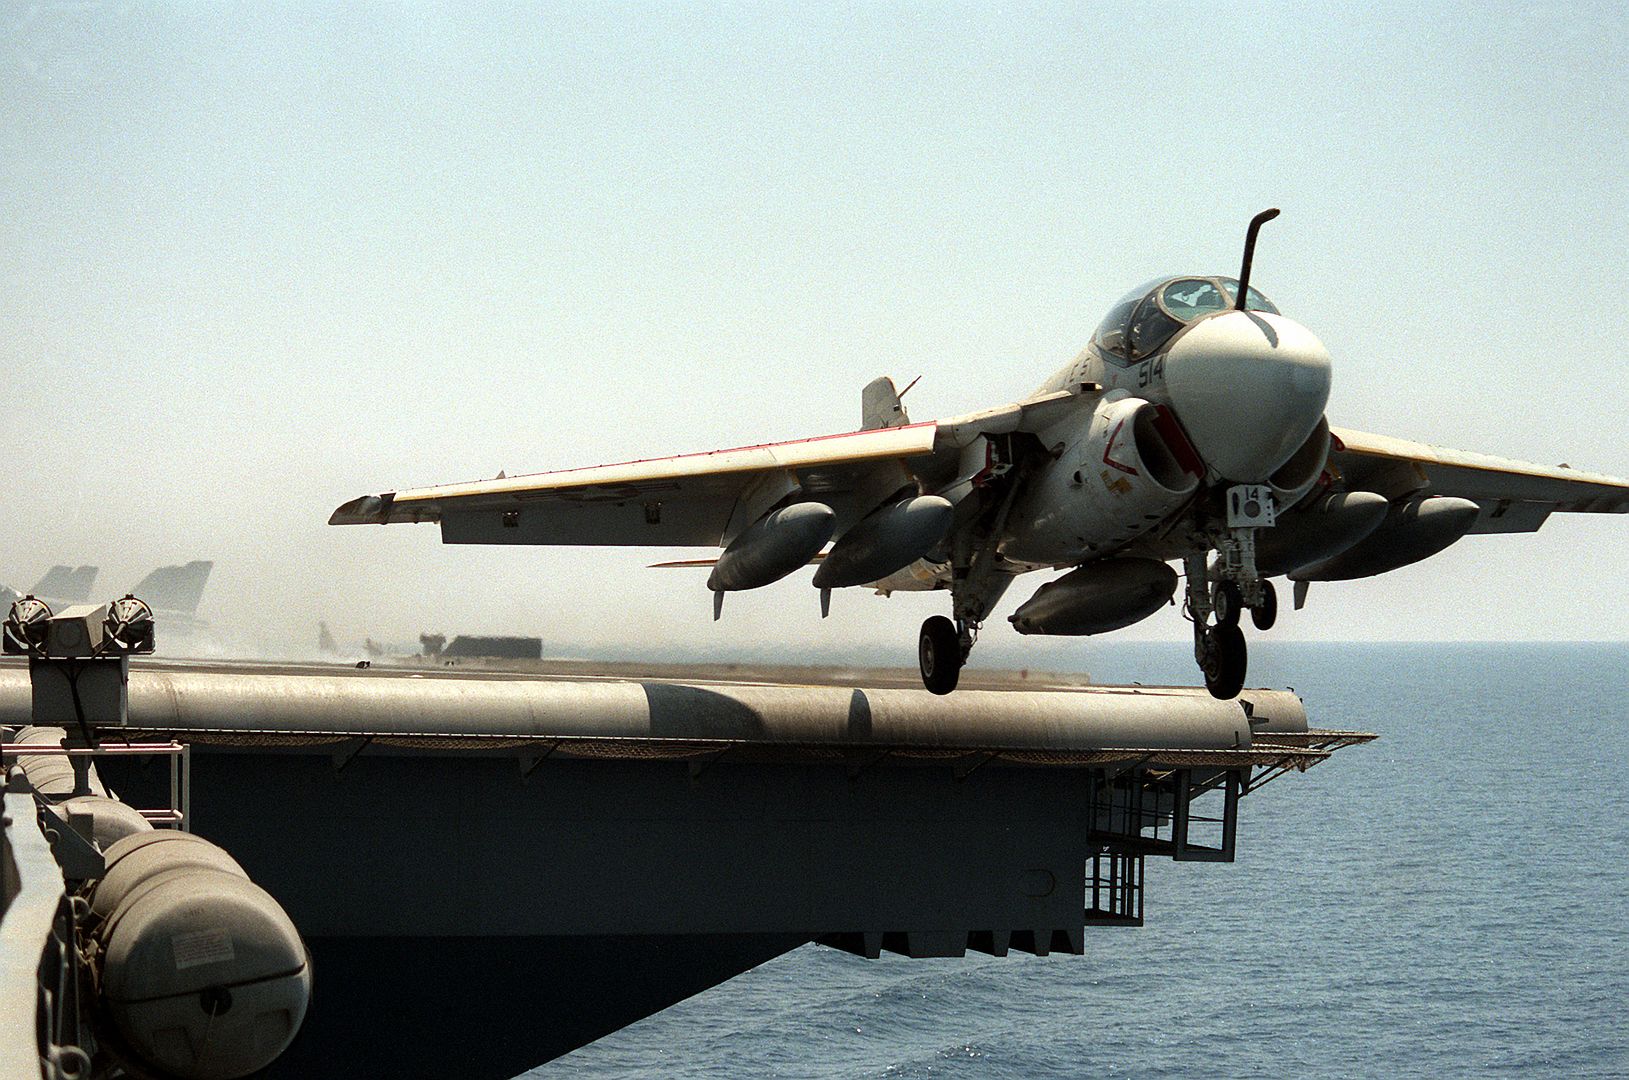 An Attack Squadron 165 KA 6D Intruder Aircraft Prepares To Land Aboard The Aircraft Carrier USS KITTY HAWK 1